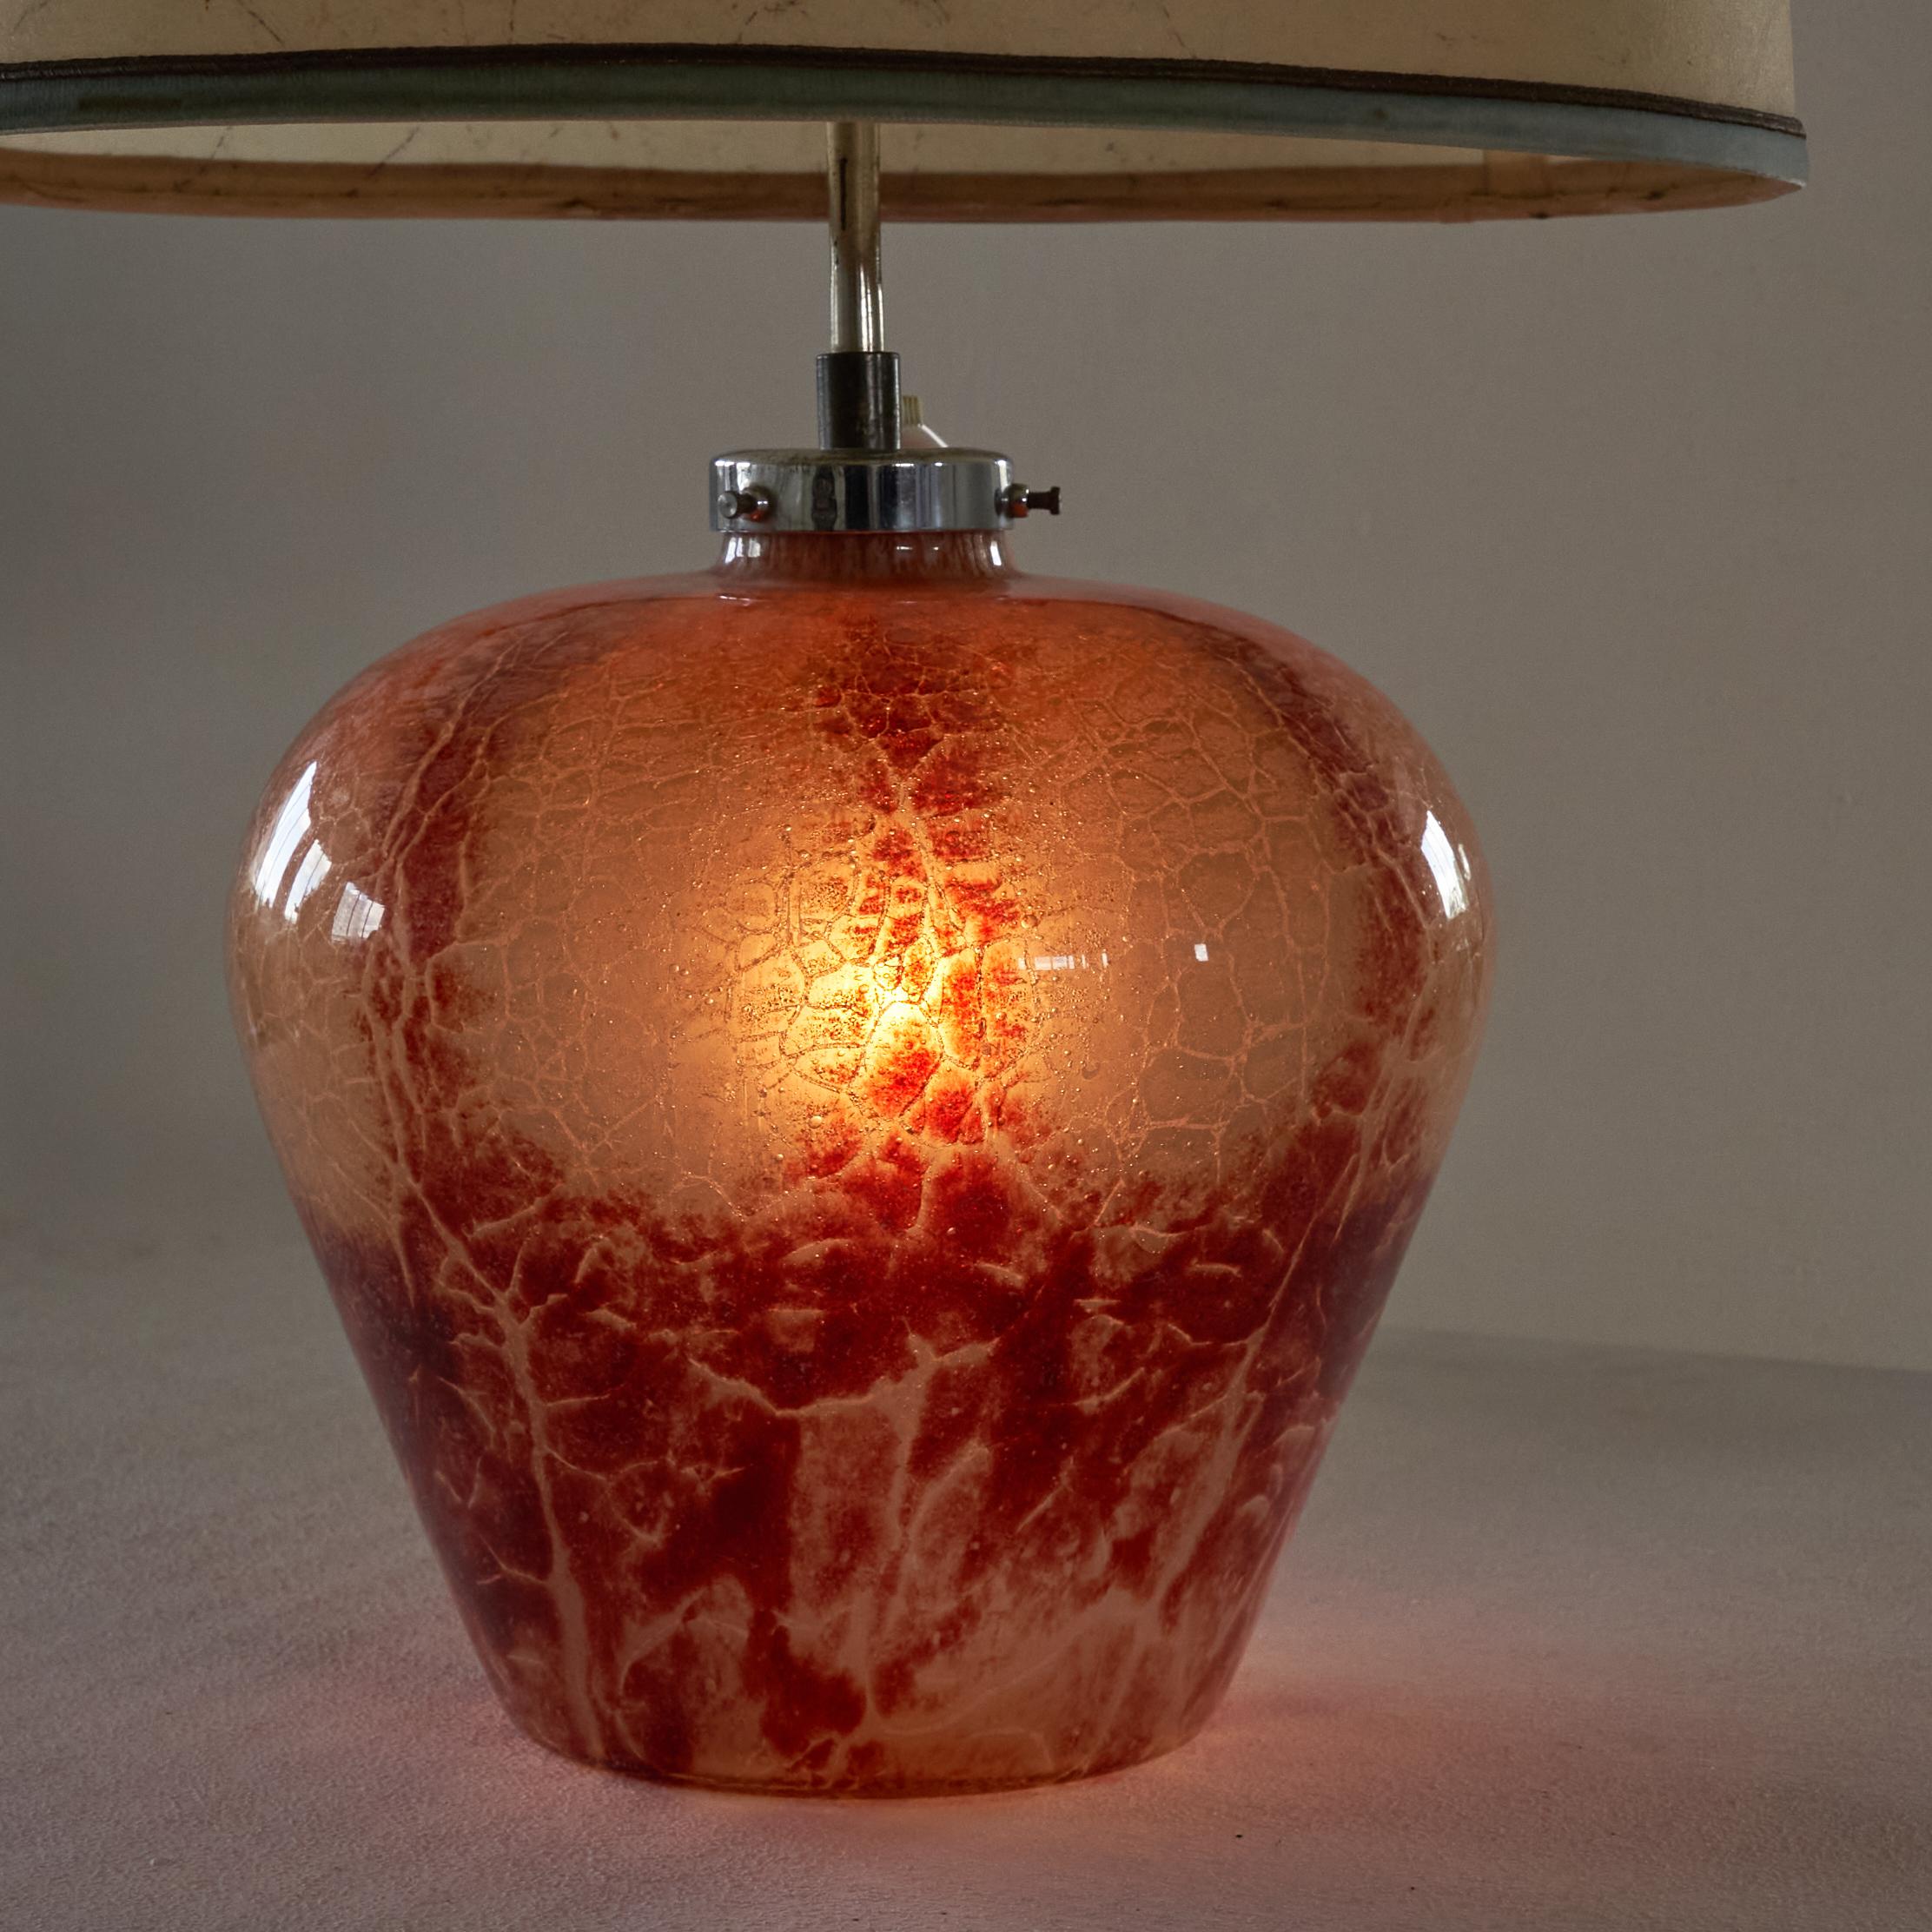 Hand-Crafted Karl Wiedmann Art Deco WMF Table Lamp in Art Glass with Original Shade 1930s For Sale